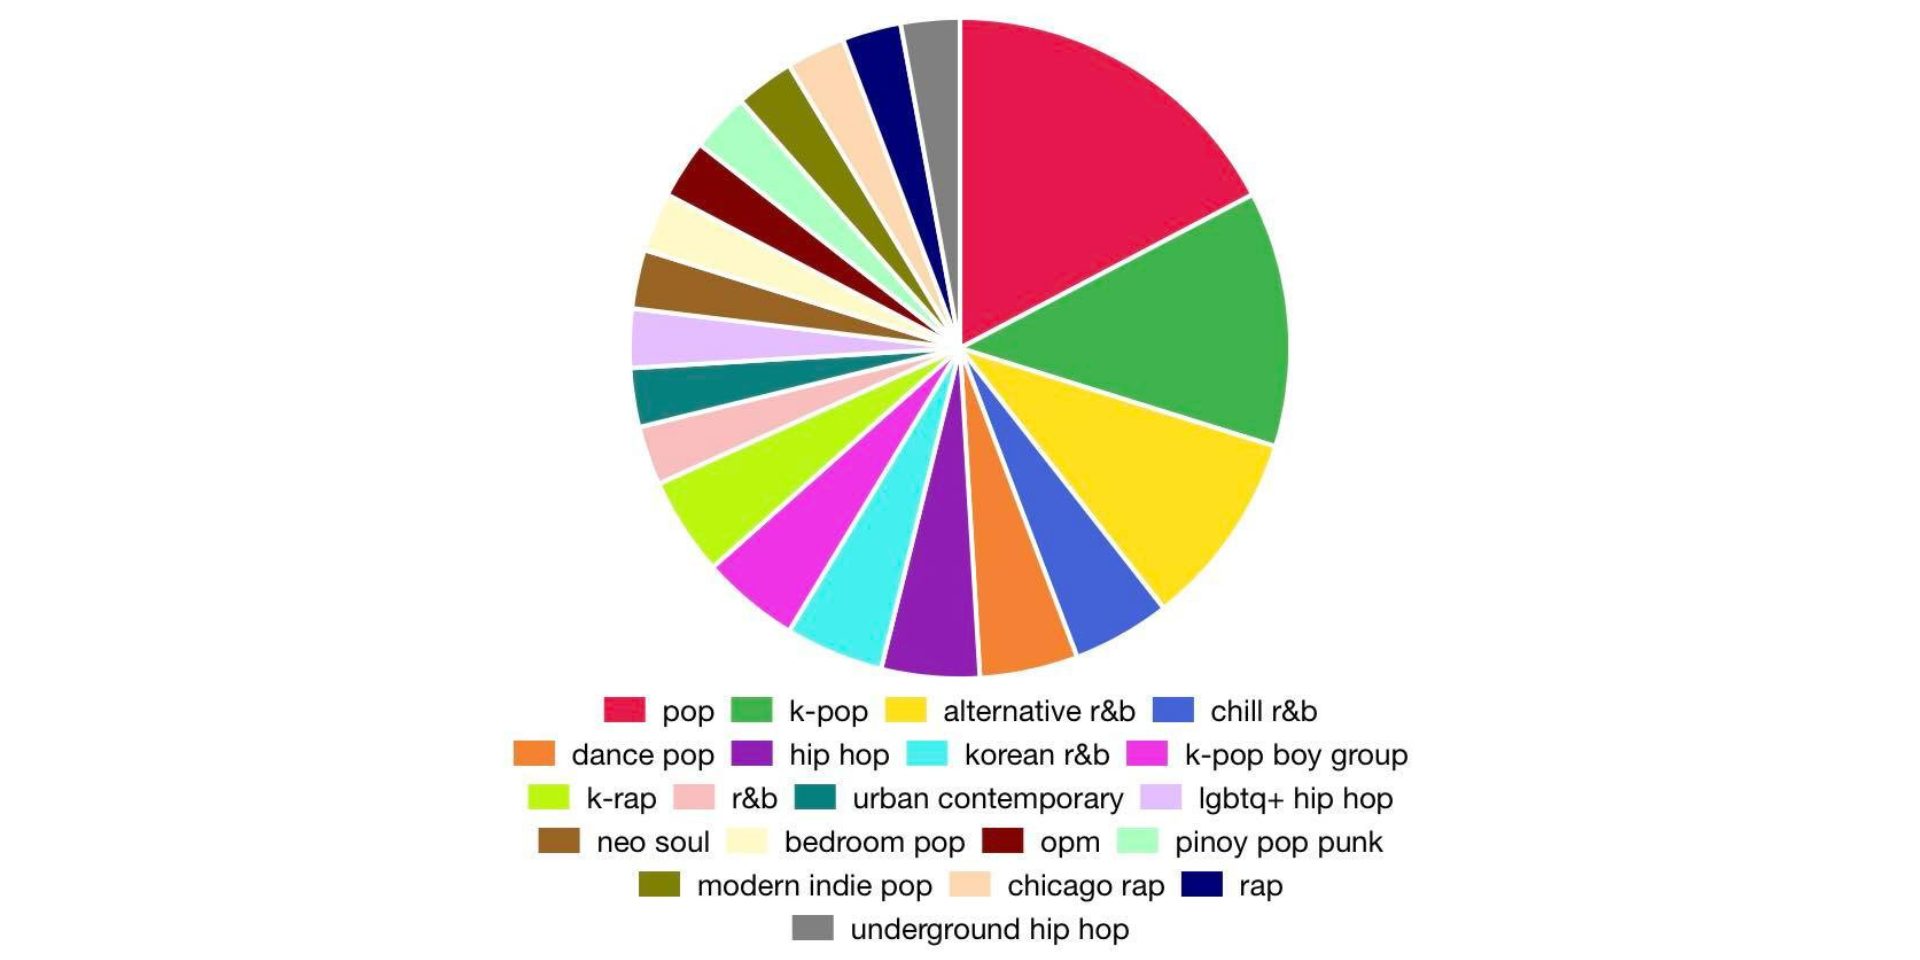 How to create Spotify pie charts?